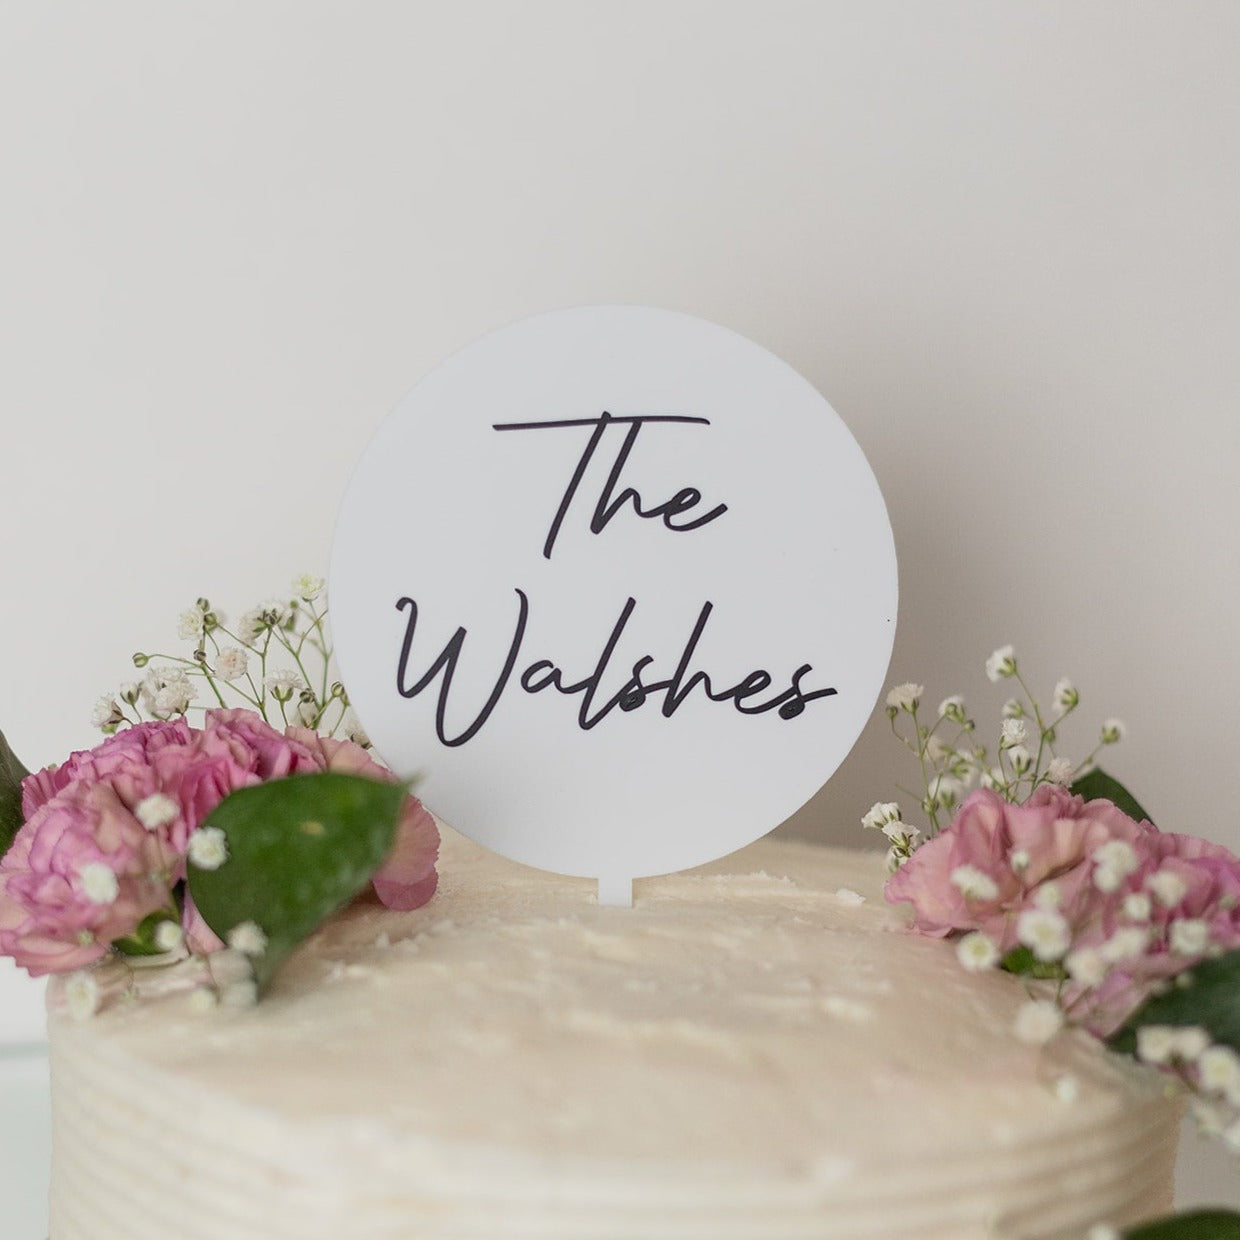 A white circle shaped cake topper sits on top of a white cake with pink flowers, sprigs of baby's breath and dark green leaves. The cake topper reads "The Walshes"